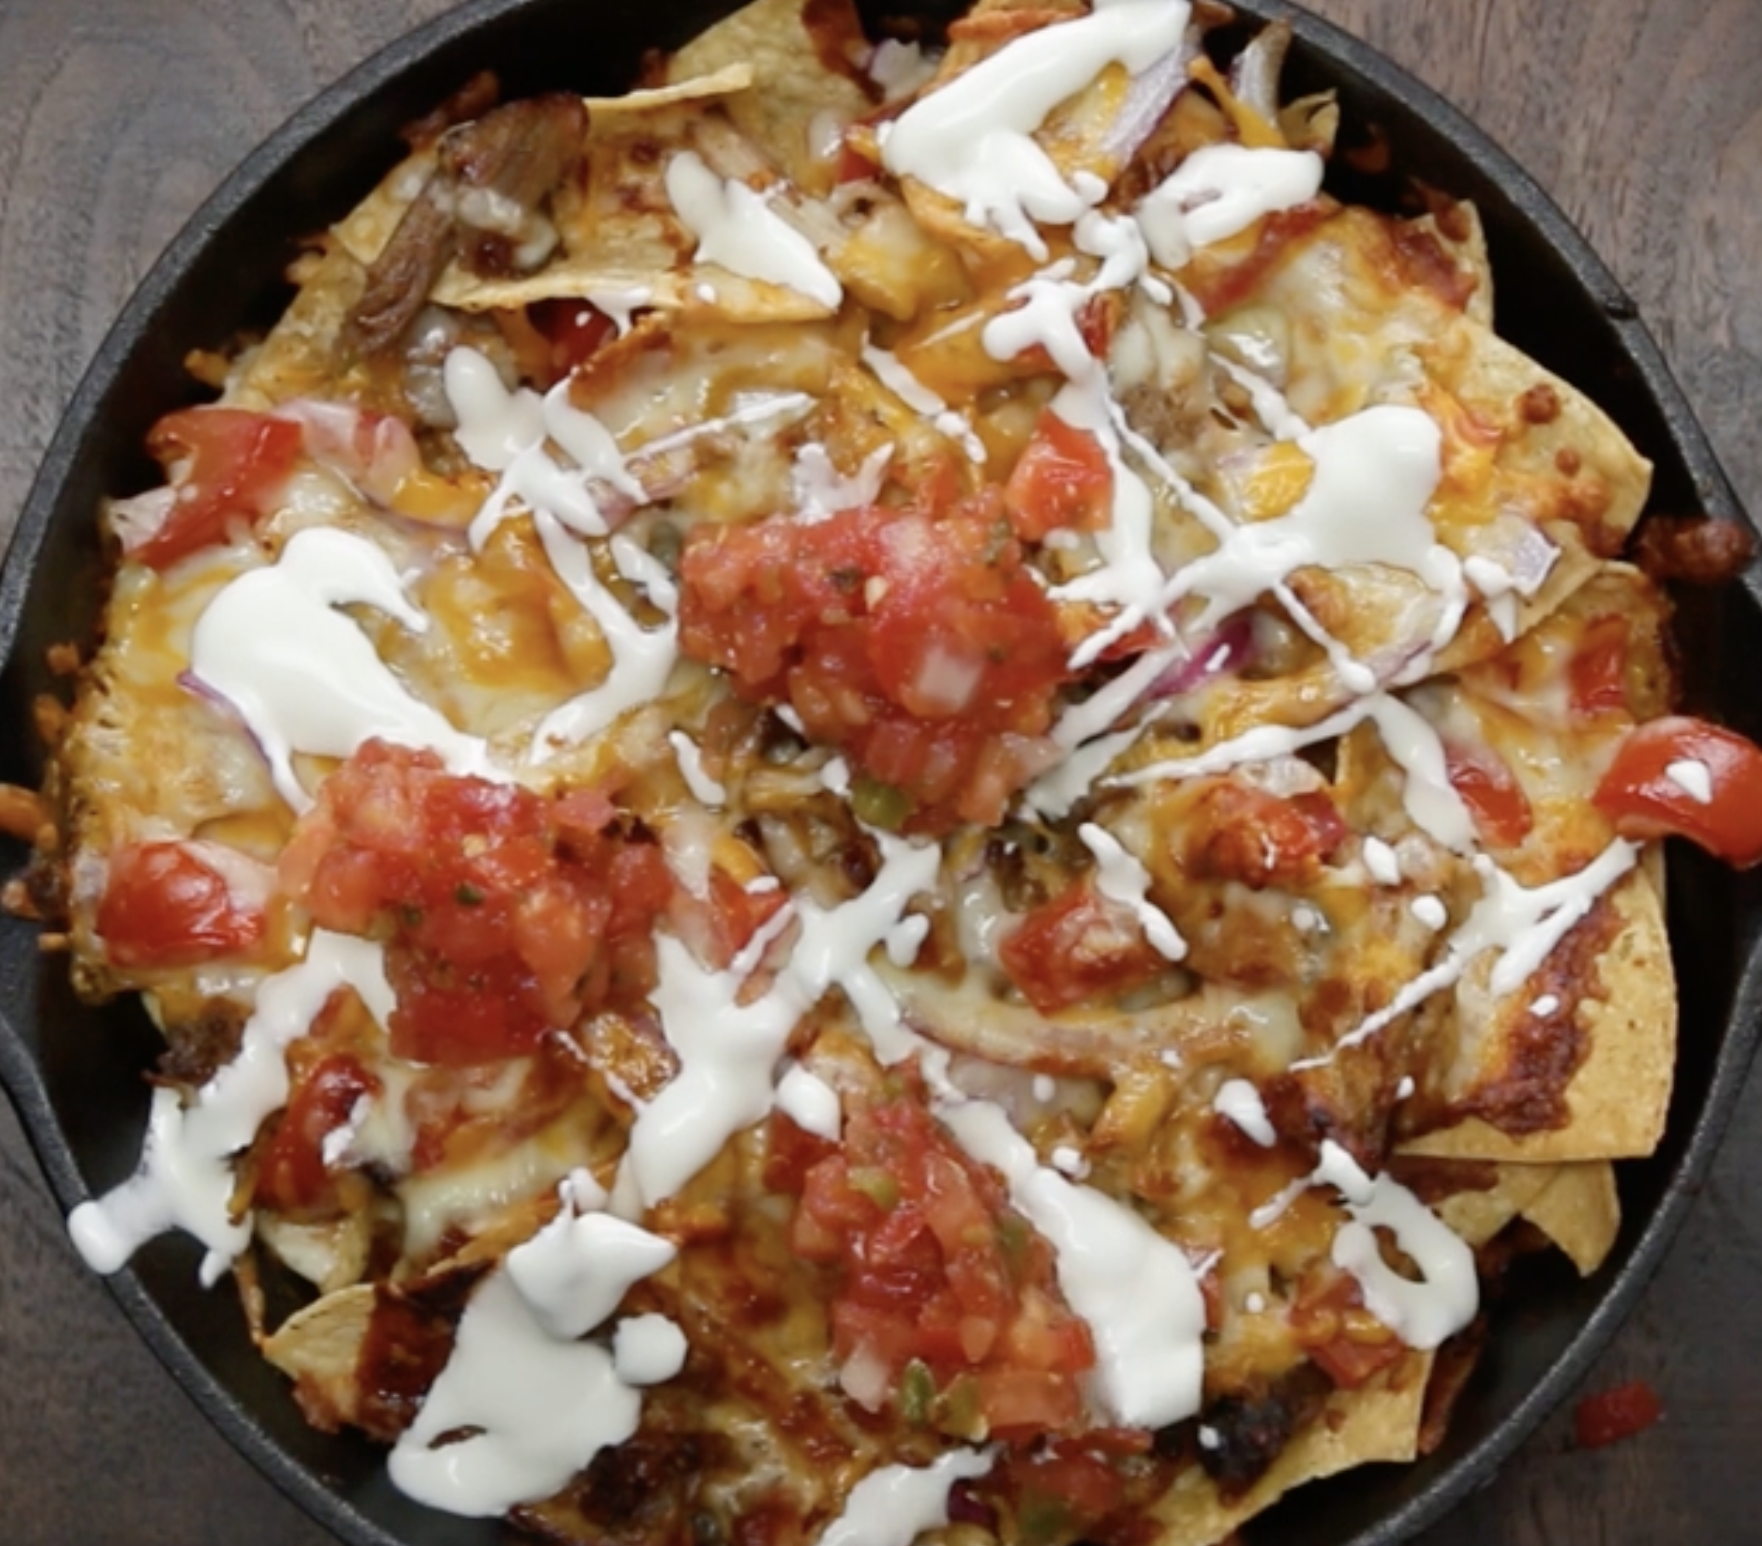 Overhead shot of a cast iron pan of baked nachos with pulled pork, tomato salsa and a sour cream drizzle.